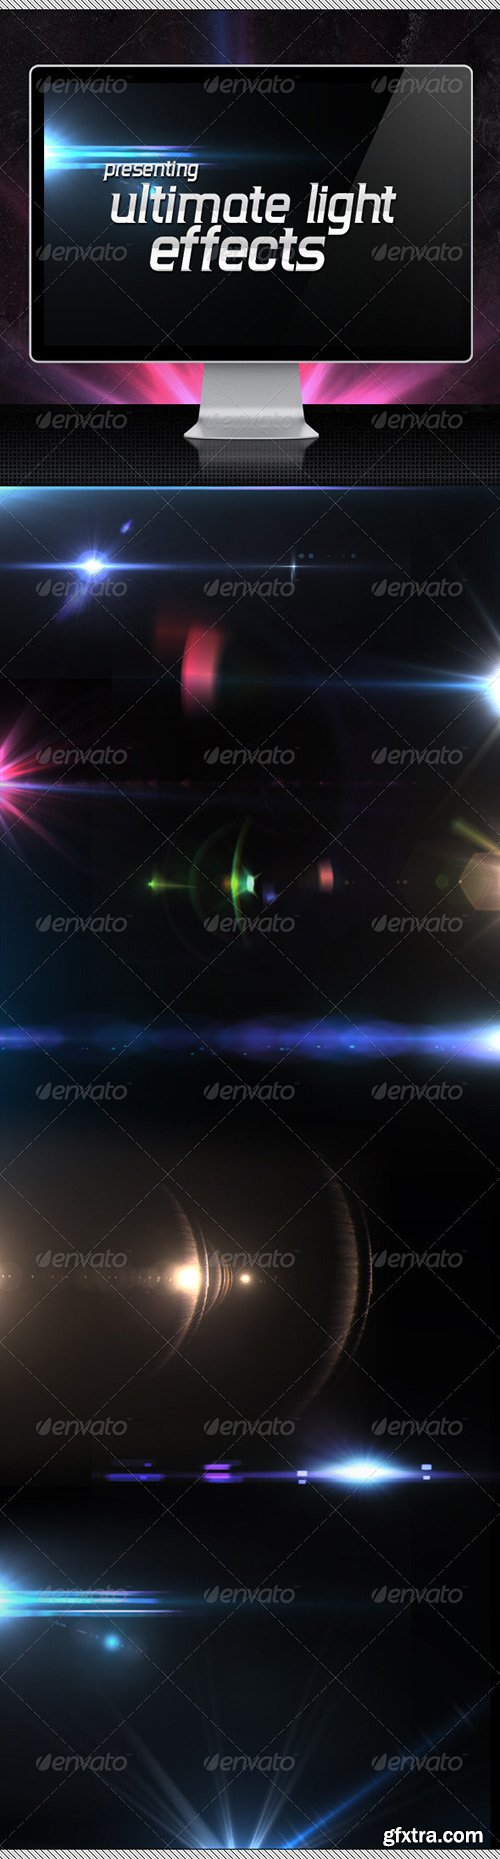 GraphicRiver - 25 Ultimate Light Effects Volume 1 1683164